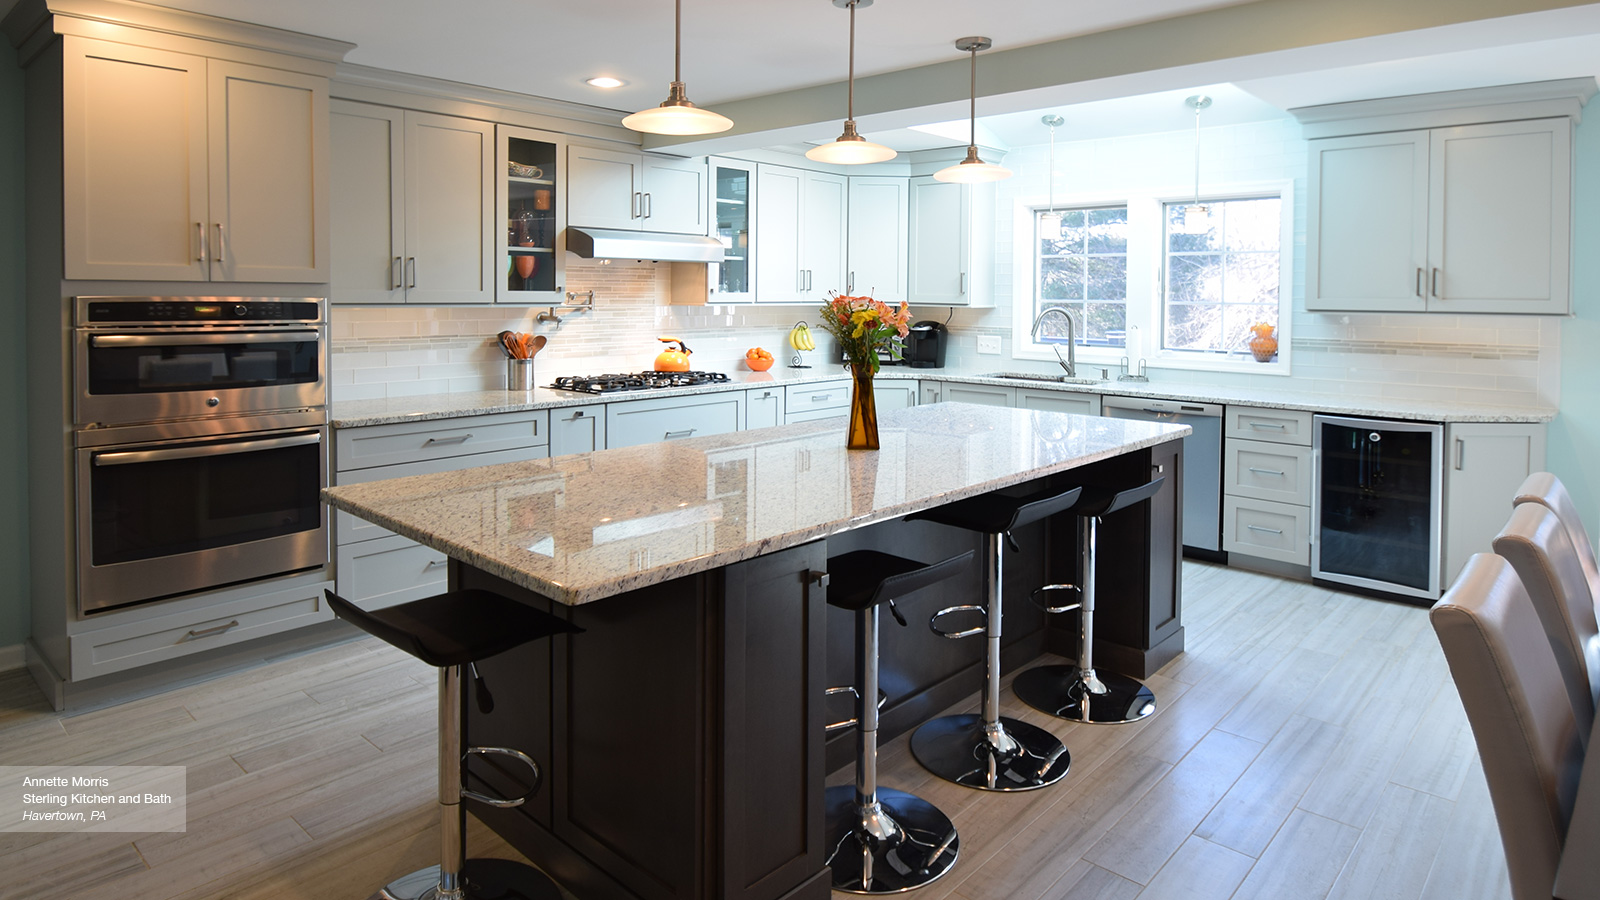 Dark gray cabinets with a contrasting island